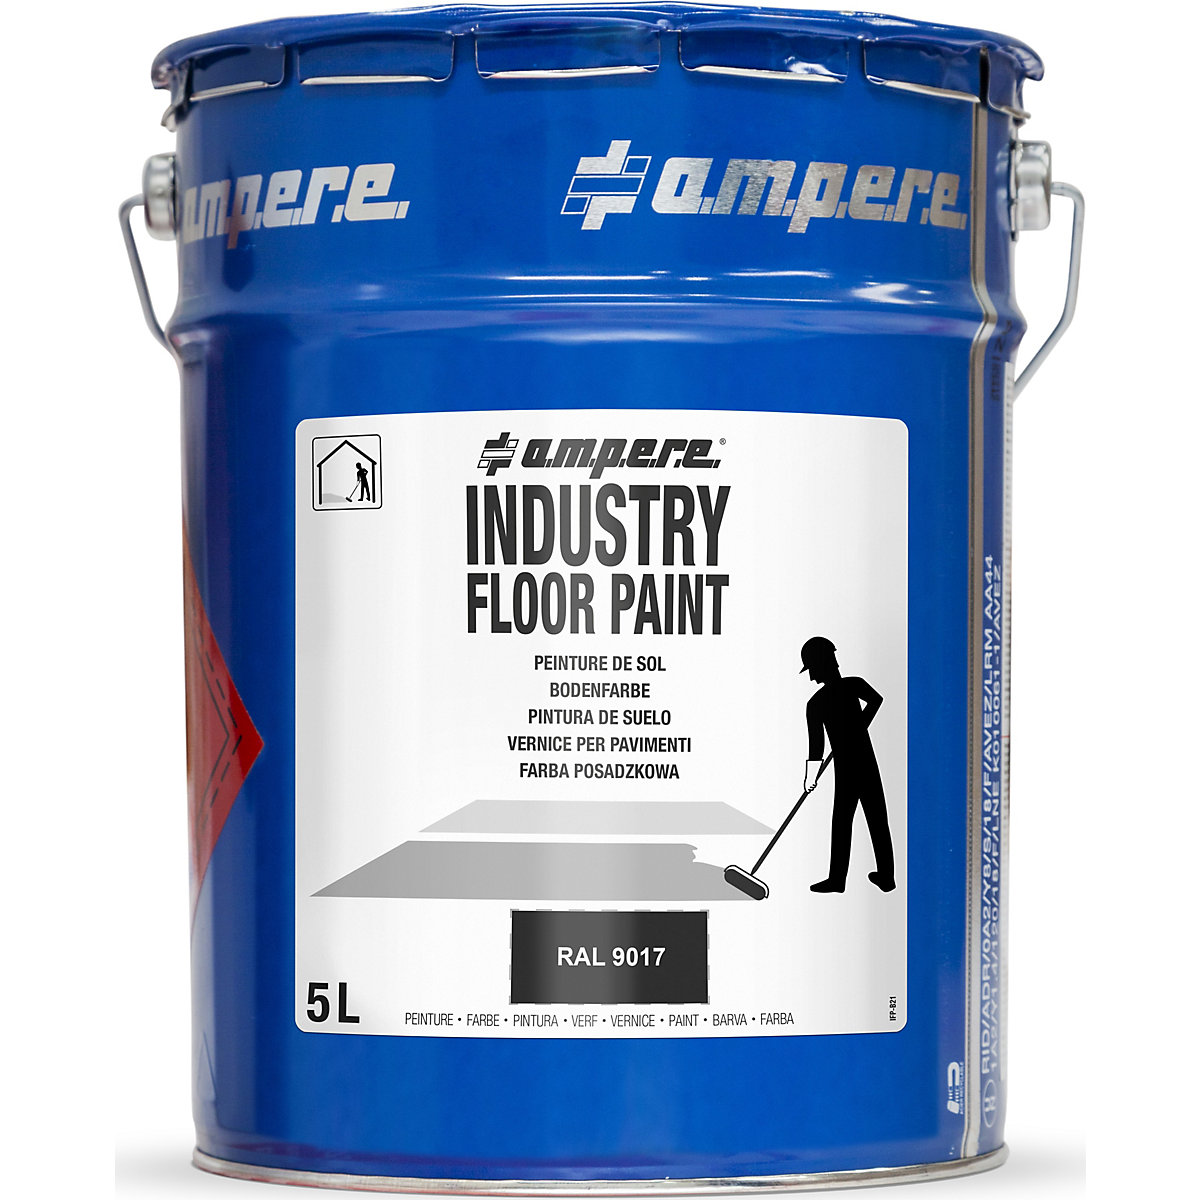 Industry Floor Paint® ground marking paint – Ampere